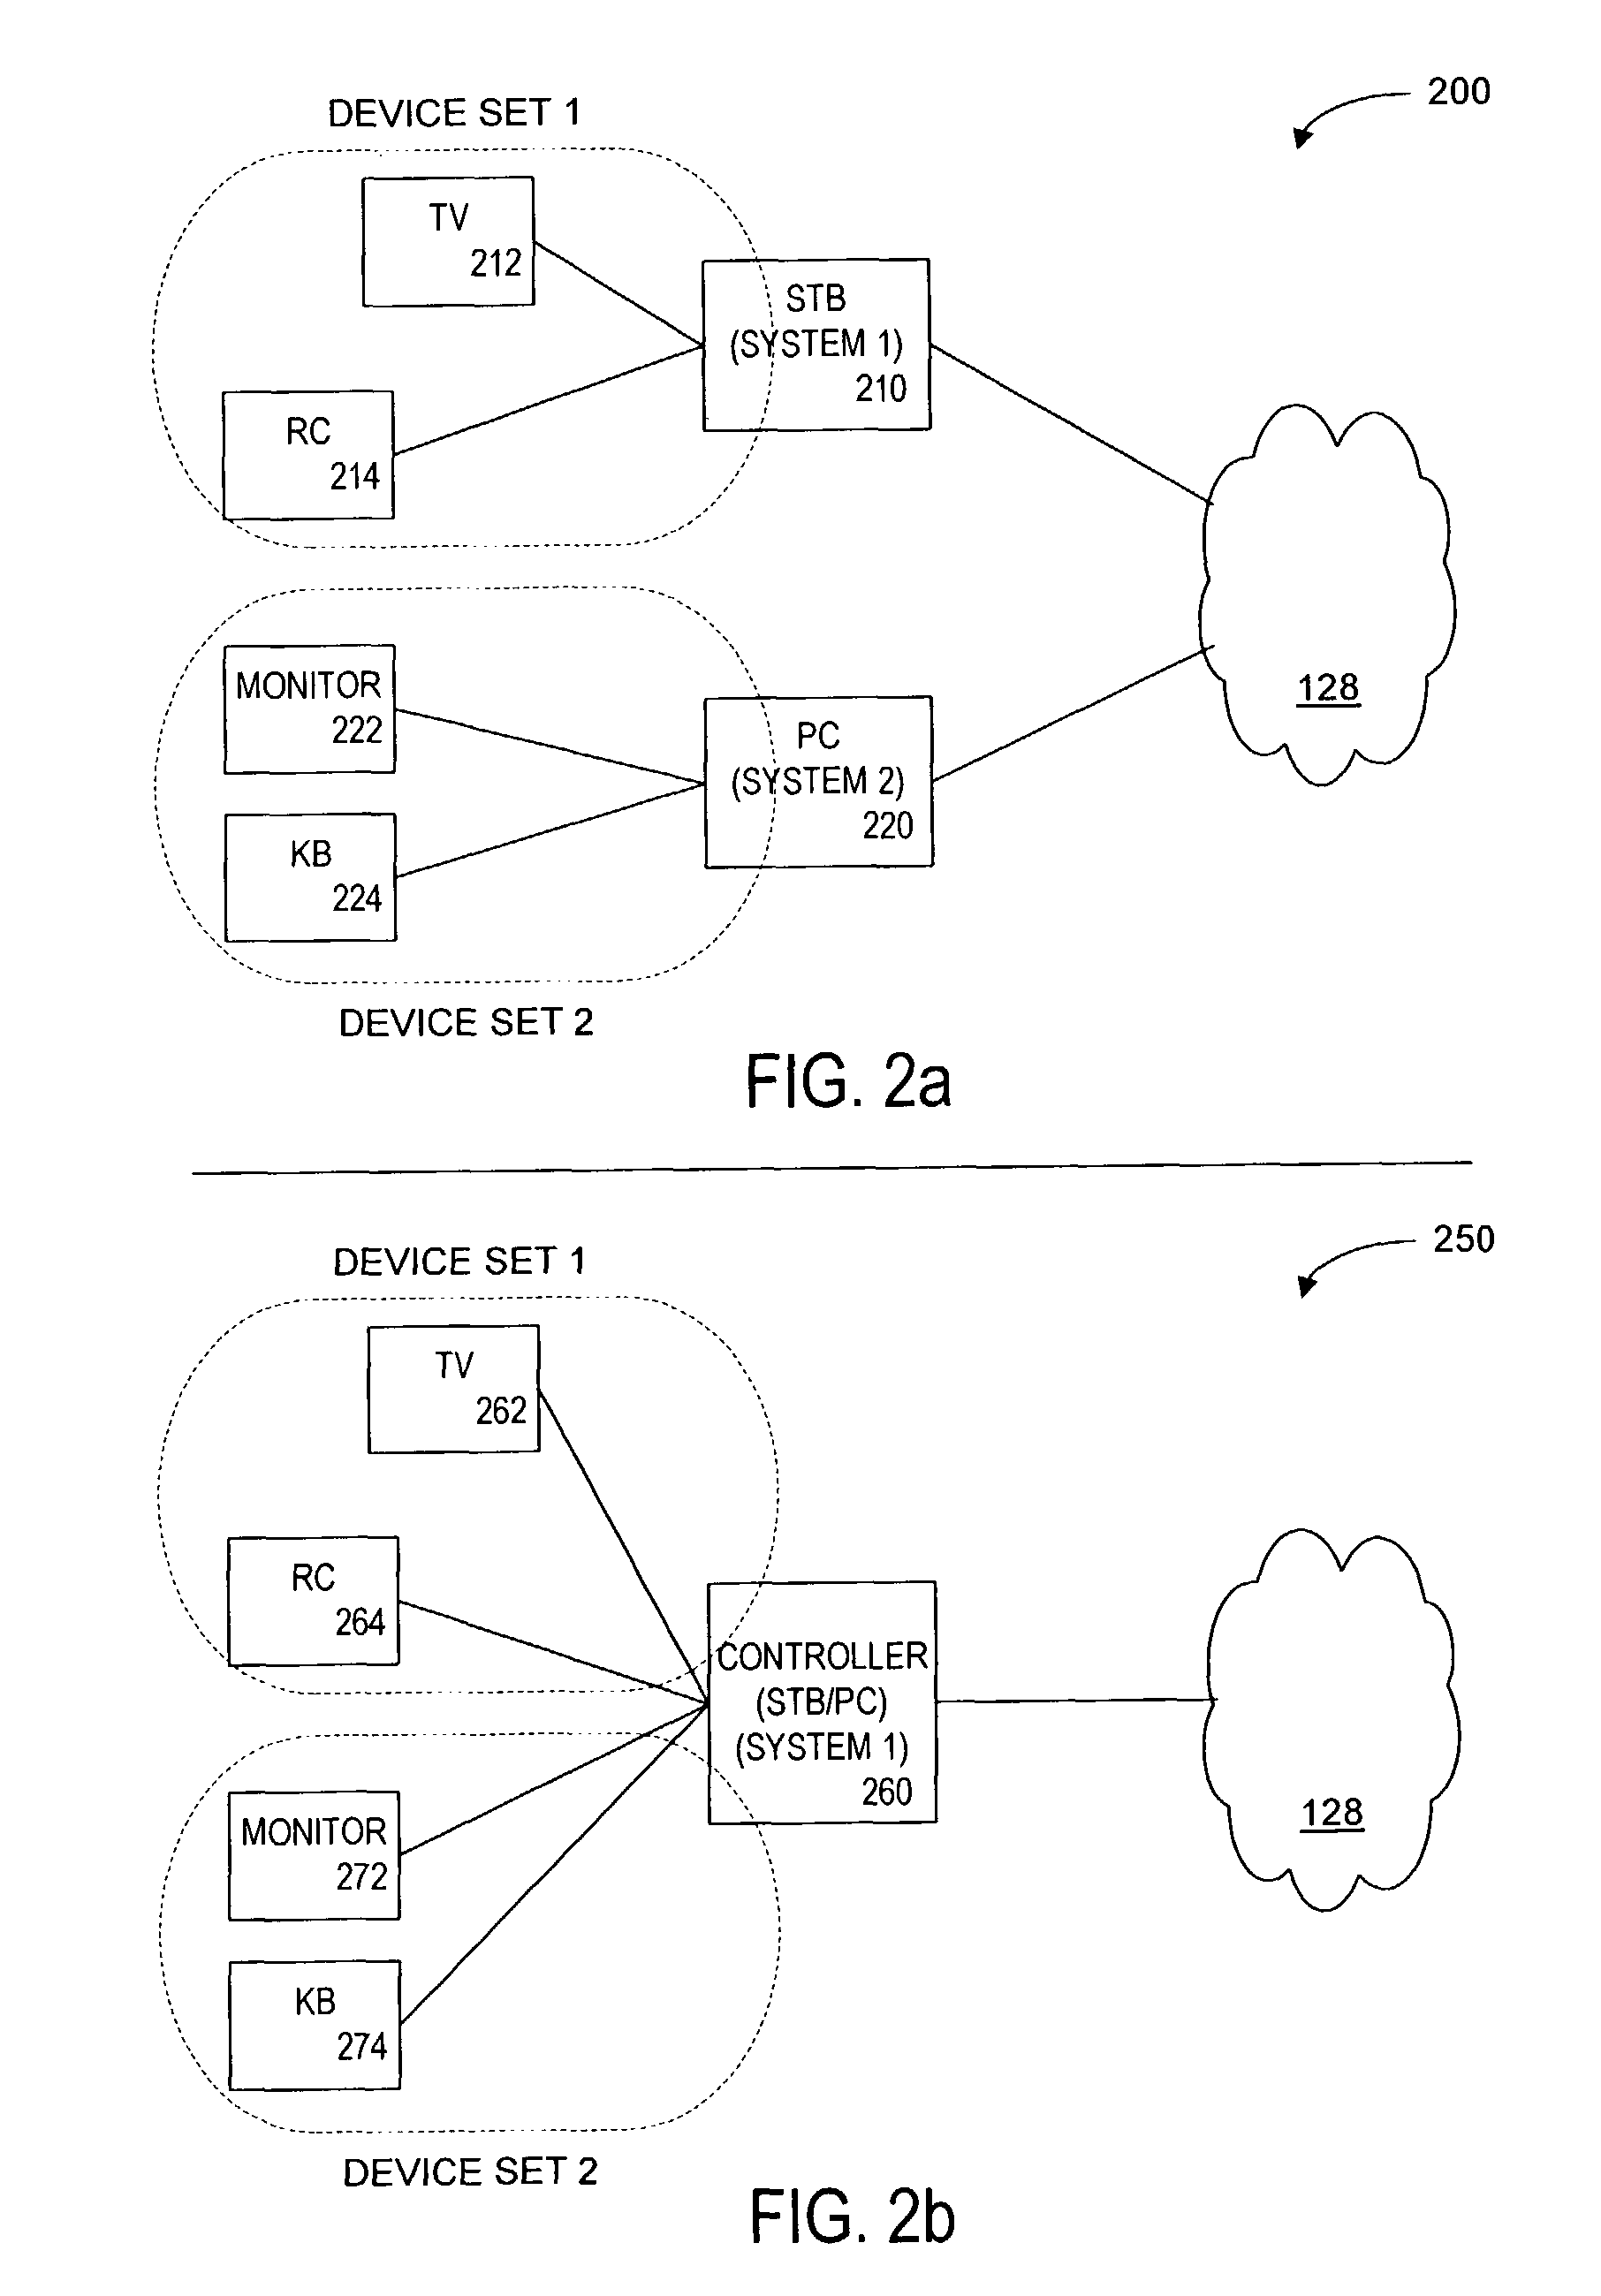 Method and apparatus for browsing using multiple coordinated device sets